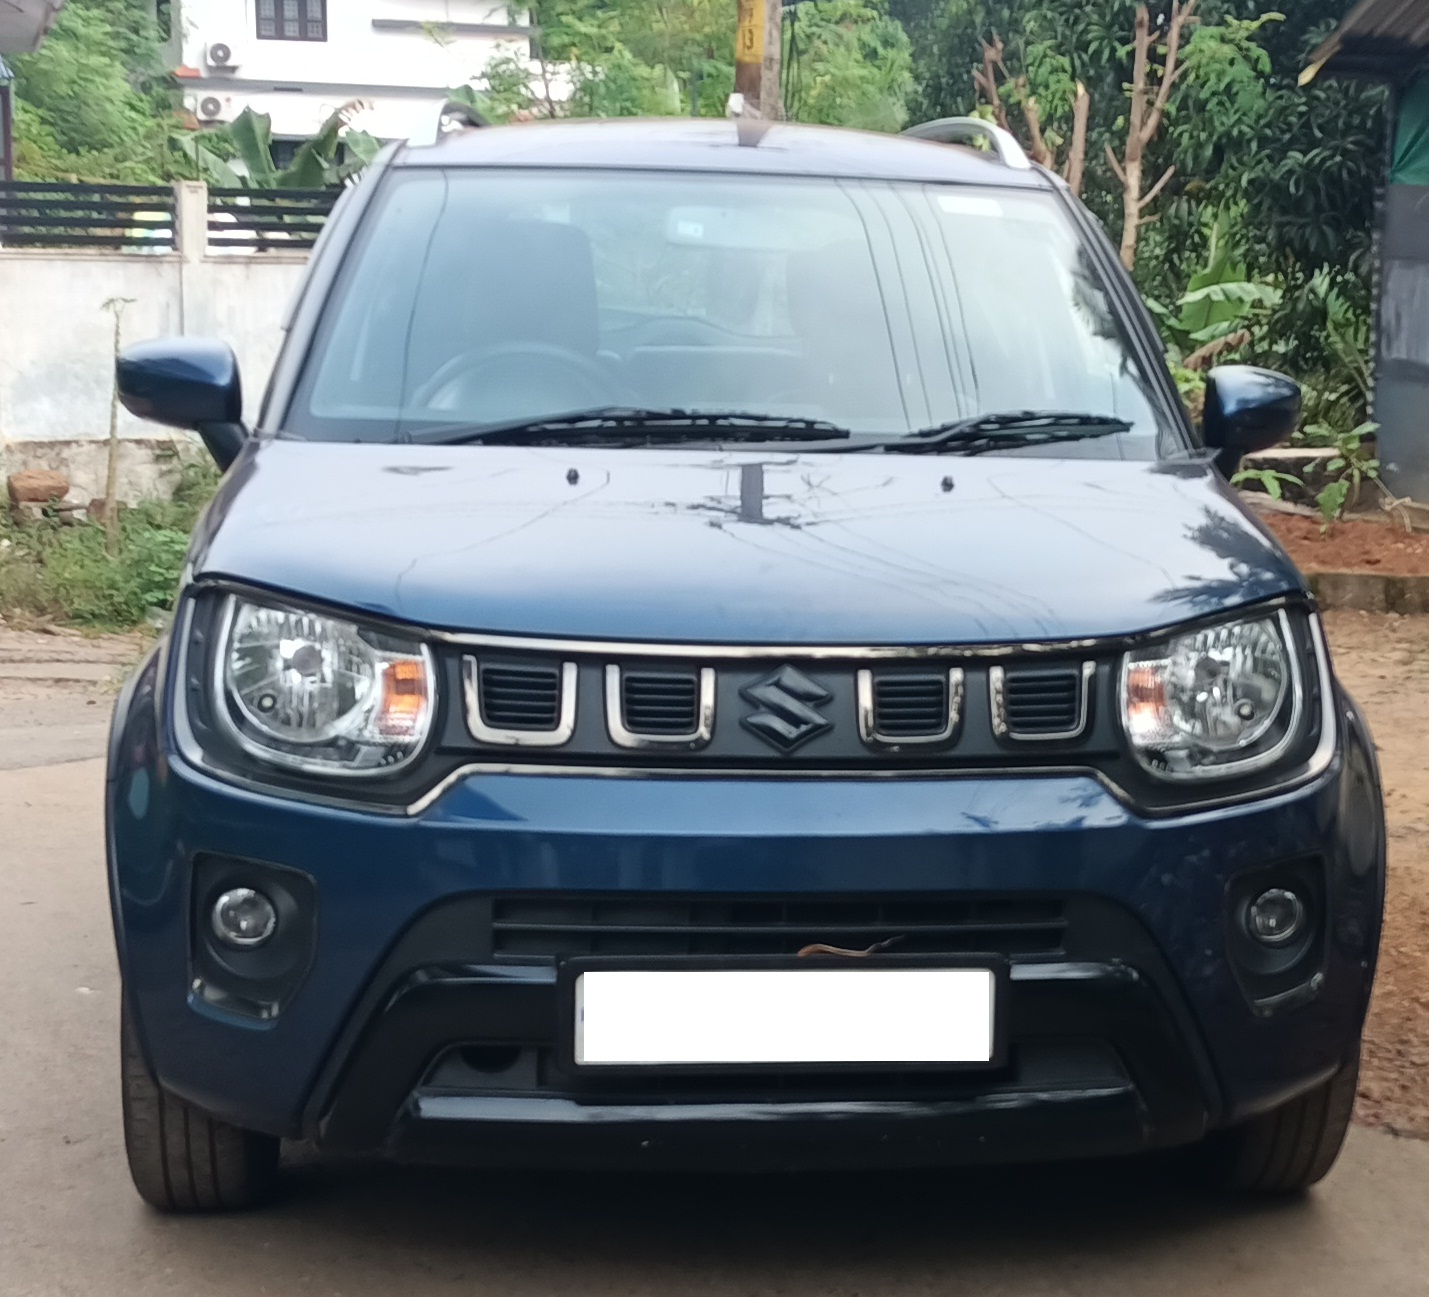 MARUTI IGNIS 2021 Second-hand Car for Sale in 